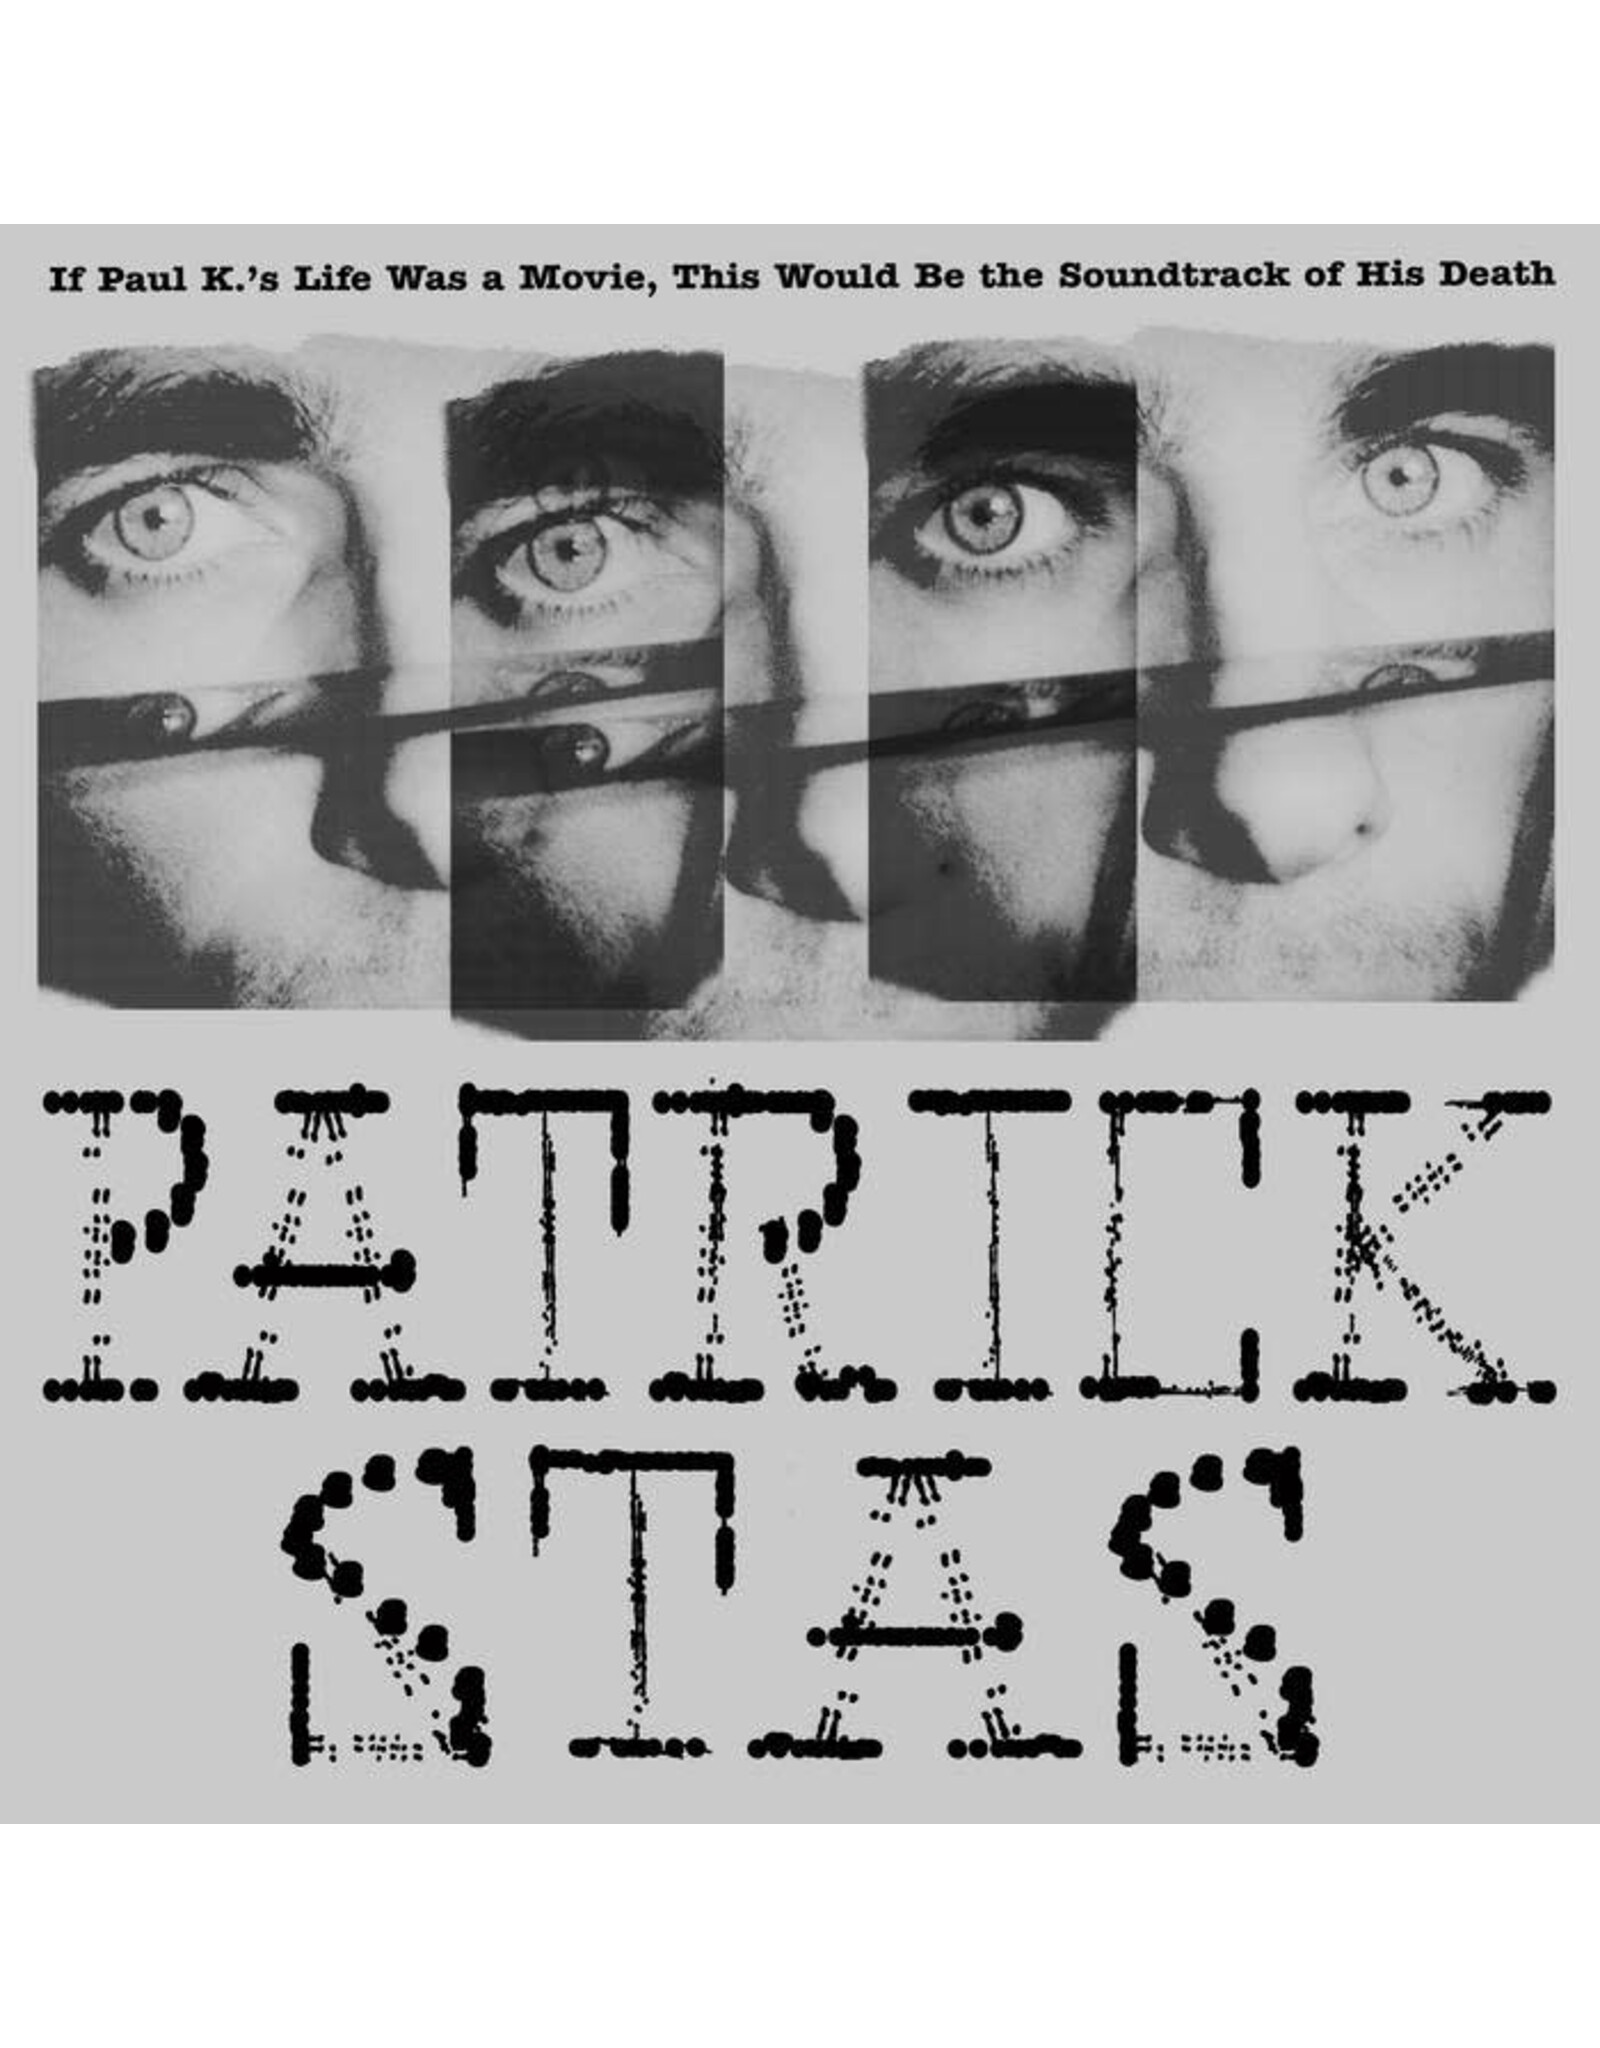 Stroom Stas, Patrick: If Paul K's Life Was a Movie, This Would Be the Soundtrack of His Death LP